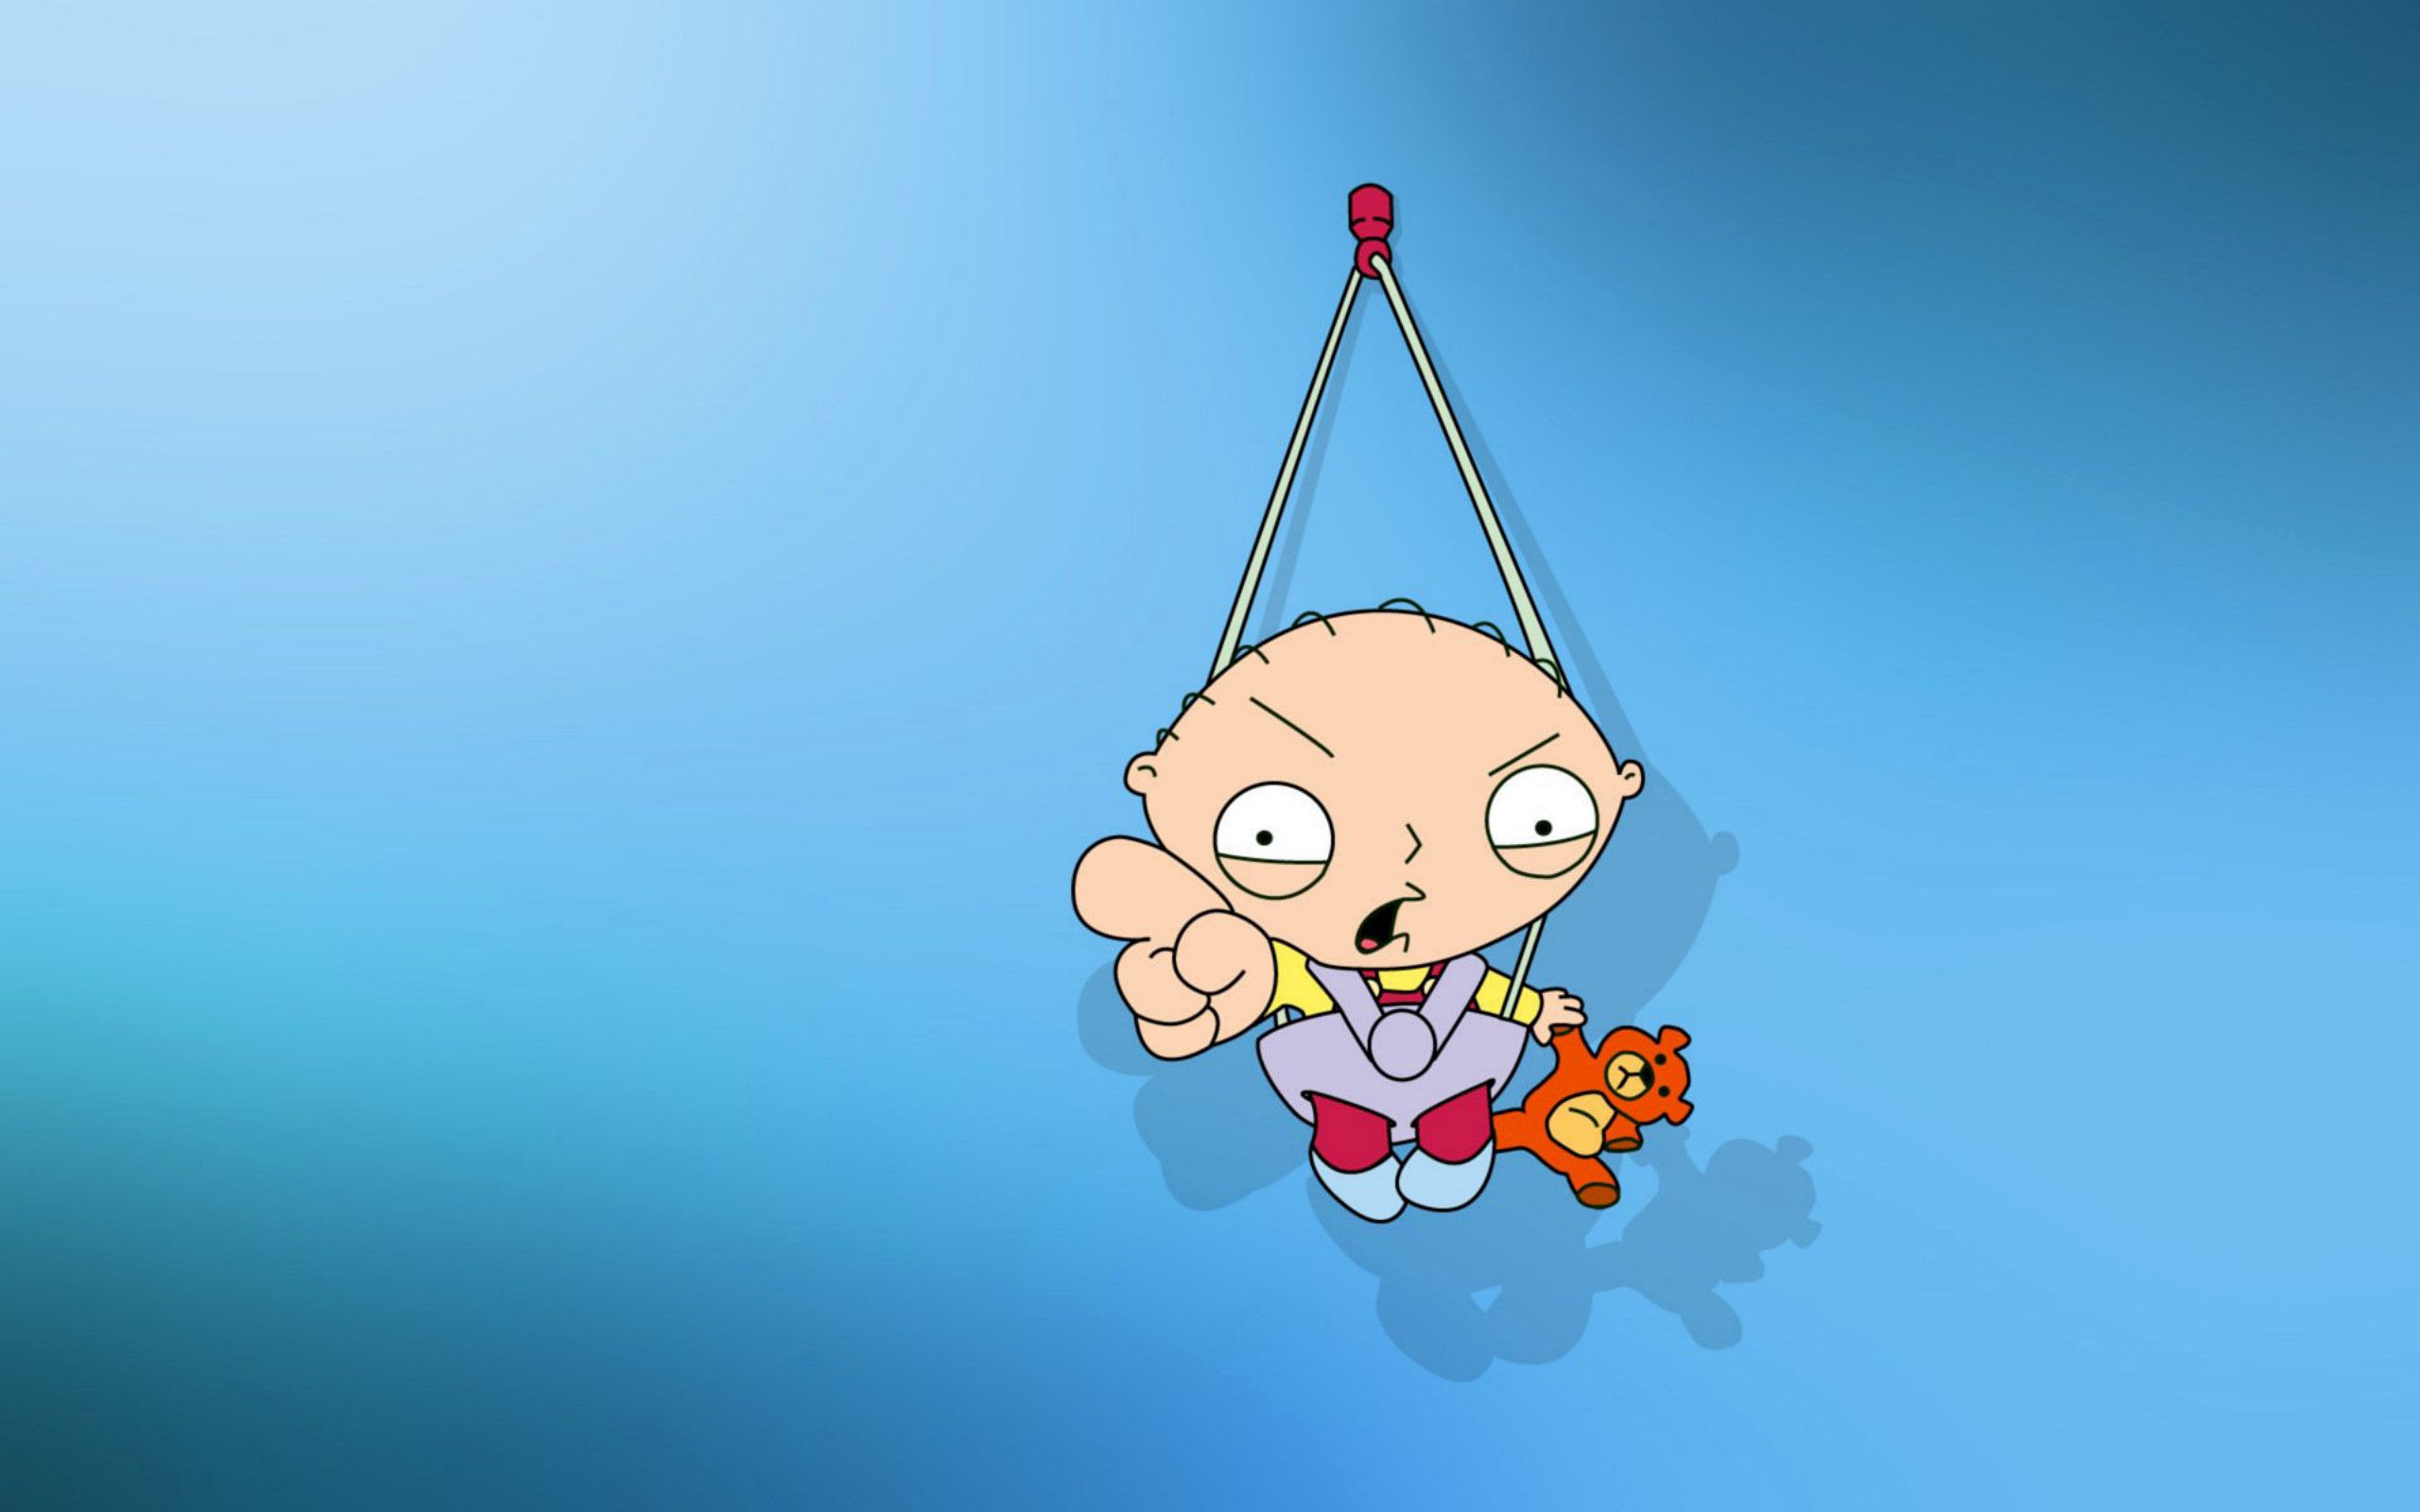 family guy, tv show, stewie griffin